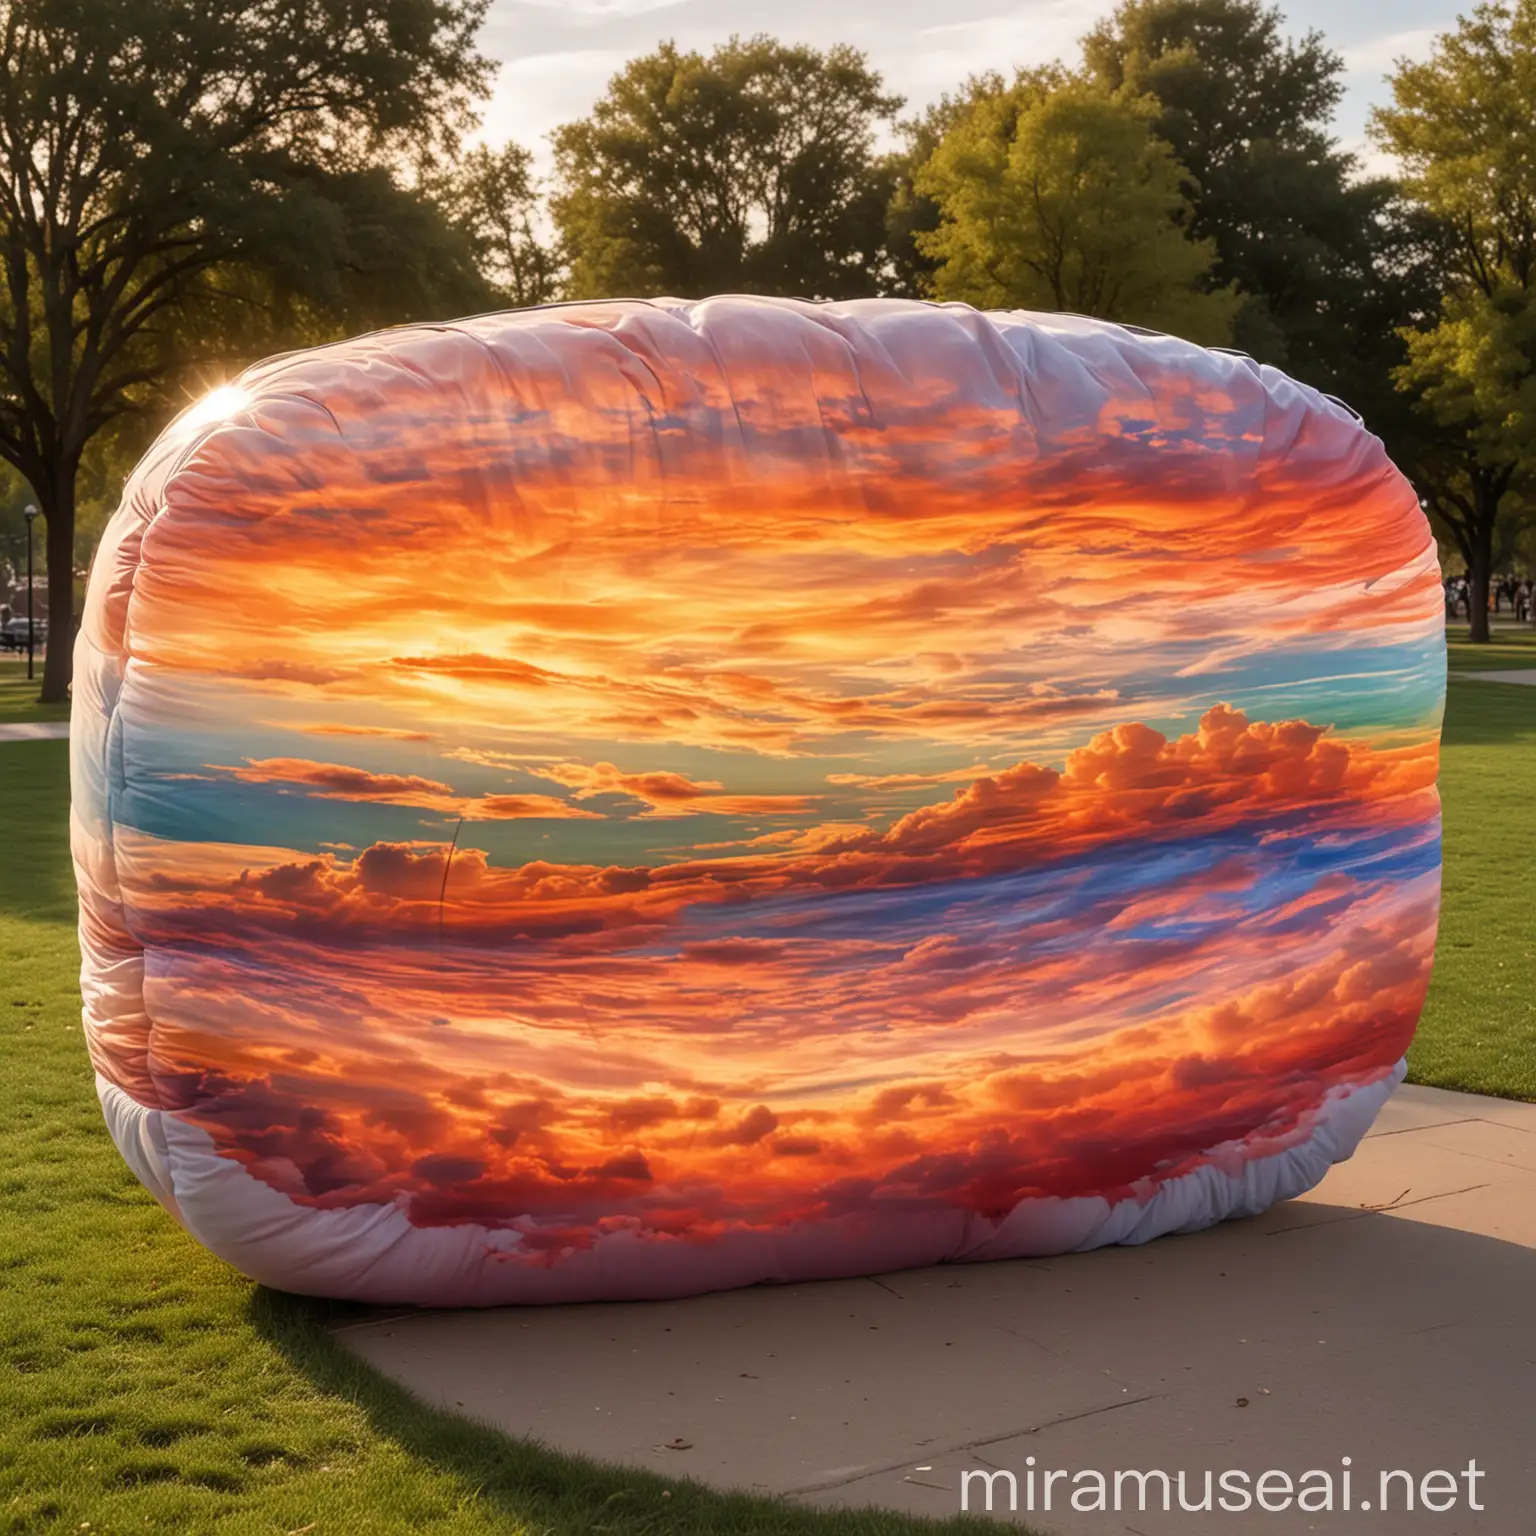 Vibrant Sunset Art Cloud Installation in American Park with Surrounding Cushions